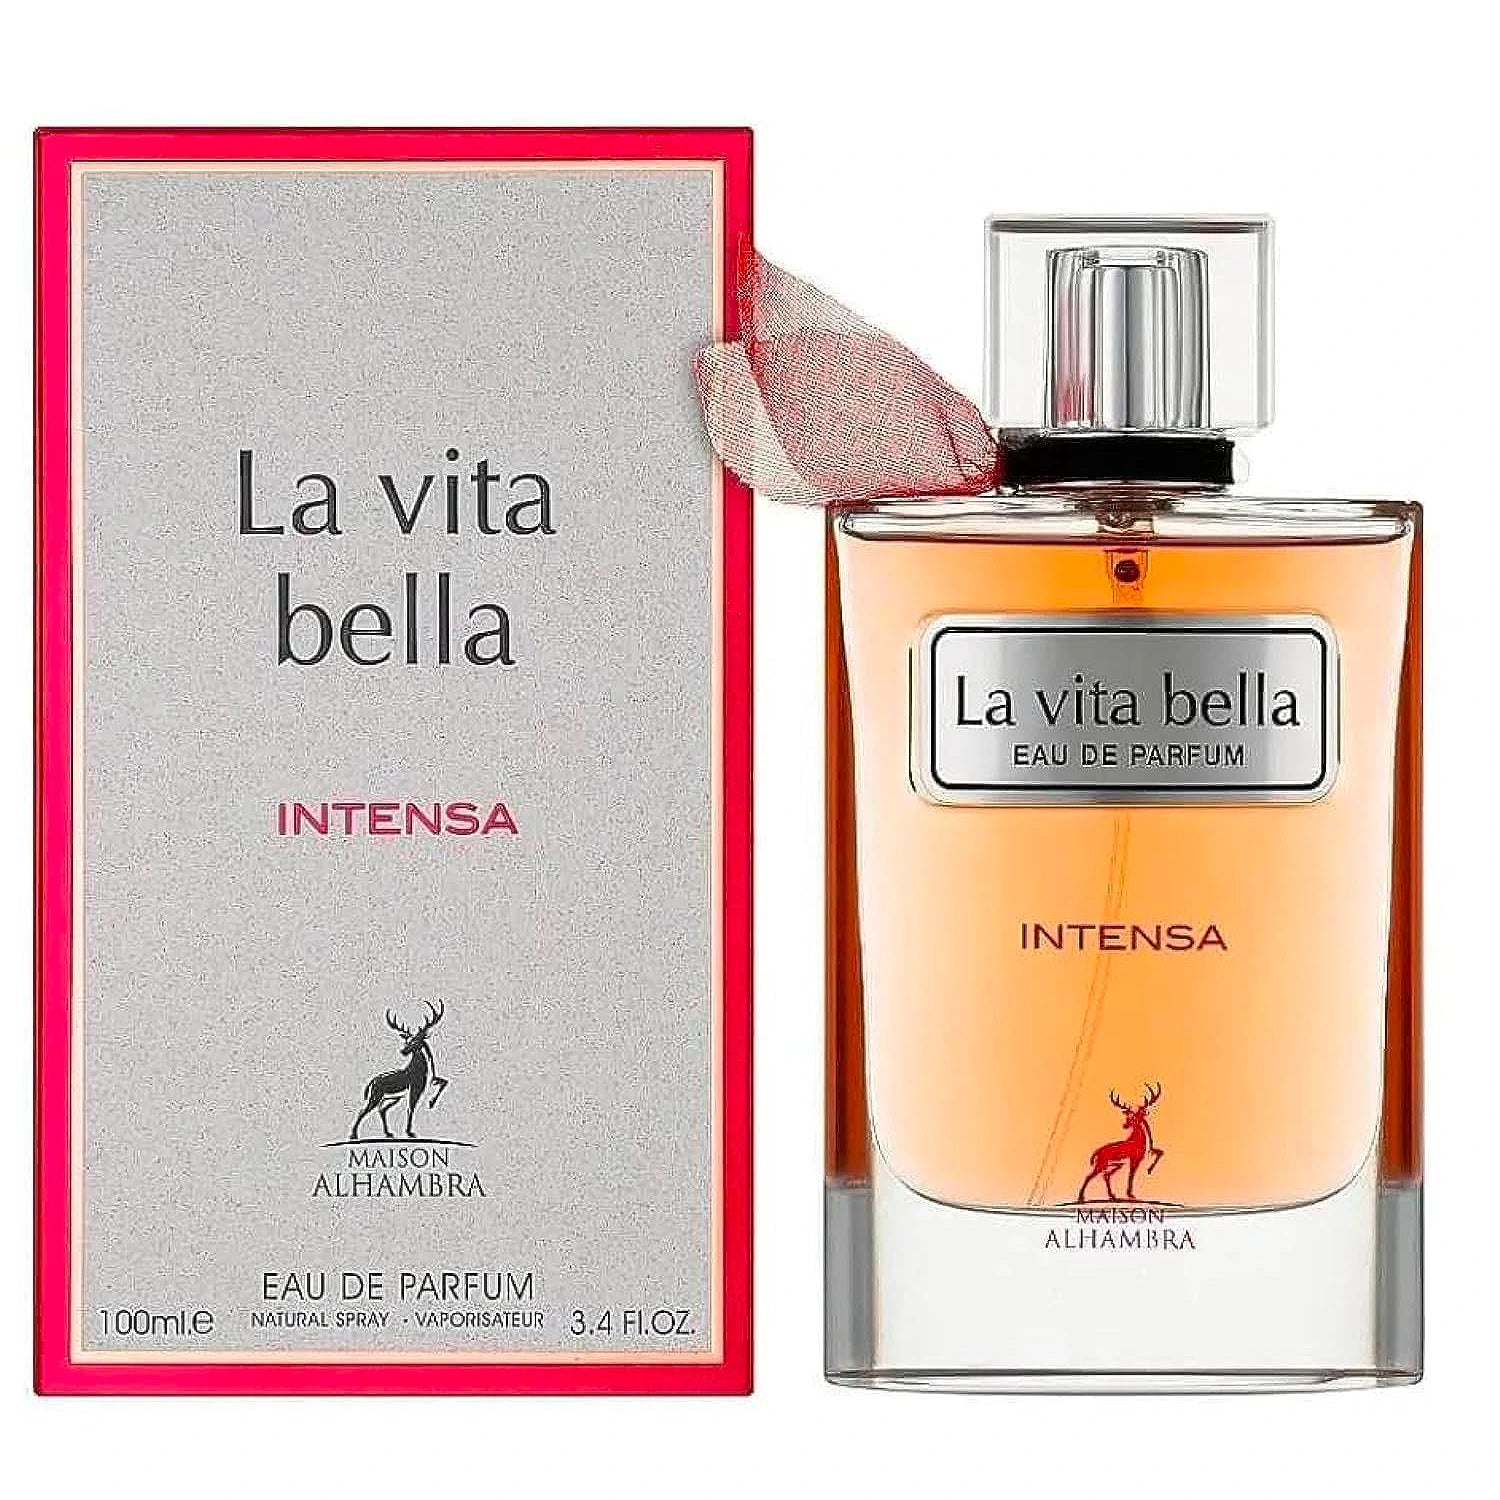 <p><em>﻿INSPIRED BY</em>﻿ <strong>﻿LANCOME LA VIE EST BELLE INTENSE</strong></p>
<p>Indulge your senses with La Vita Bella Intensa, a luxurious EDP for women that melds heady notes of Black Currant, Pear, Iris, Jasmine, Orange Blossom, Praline, Vanilla, Patchouli, and Tonka Bean for a rich sensory experience. Fall in love with this sophisticated and exclusive fragrance.</p>